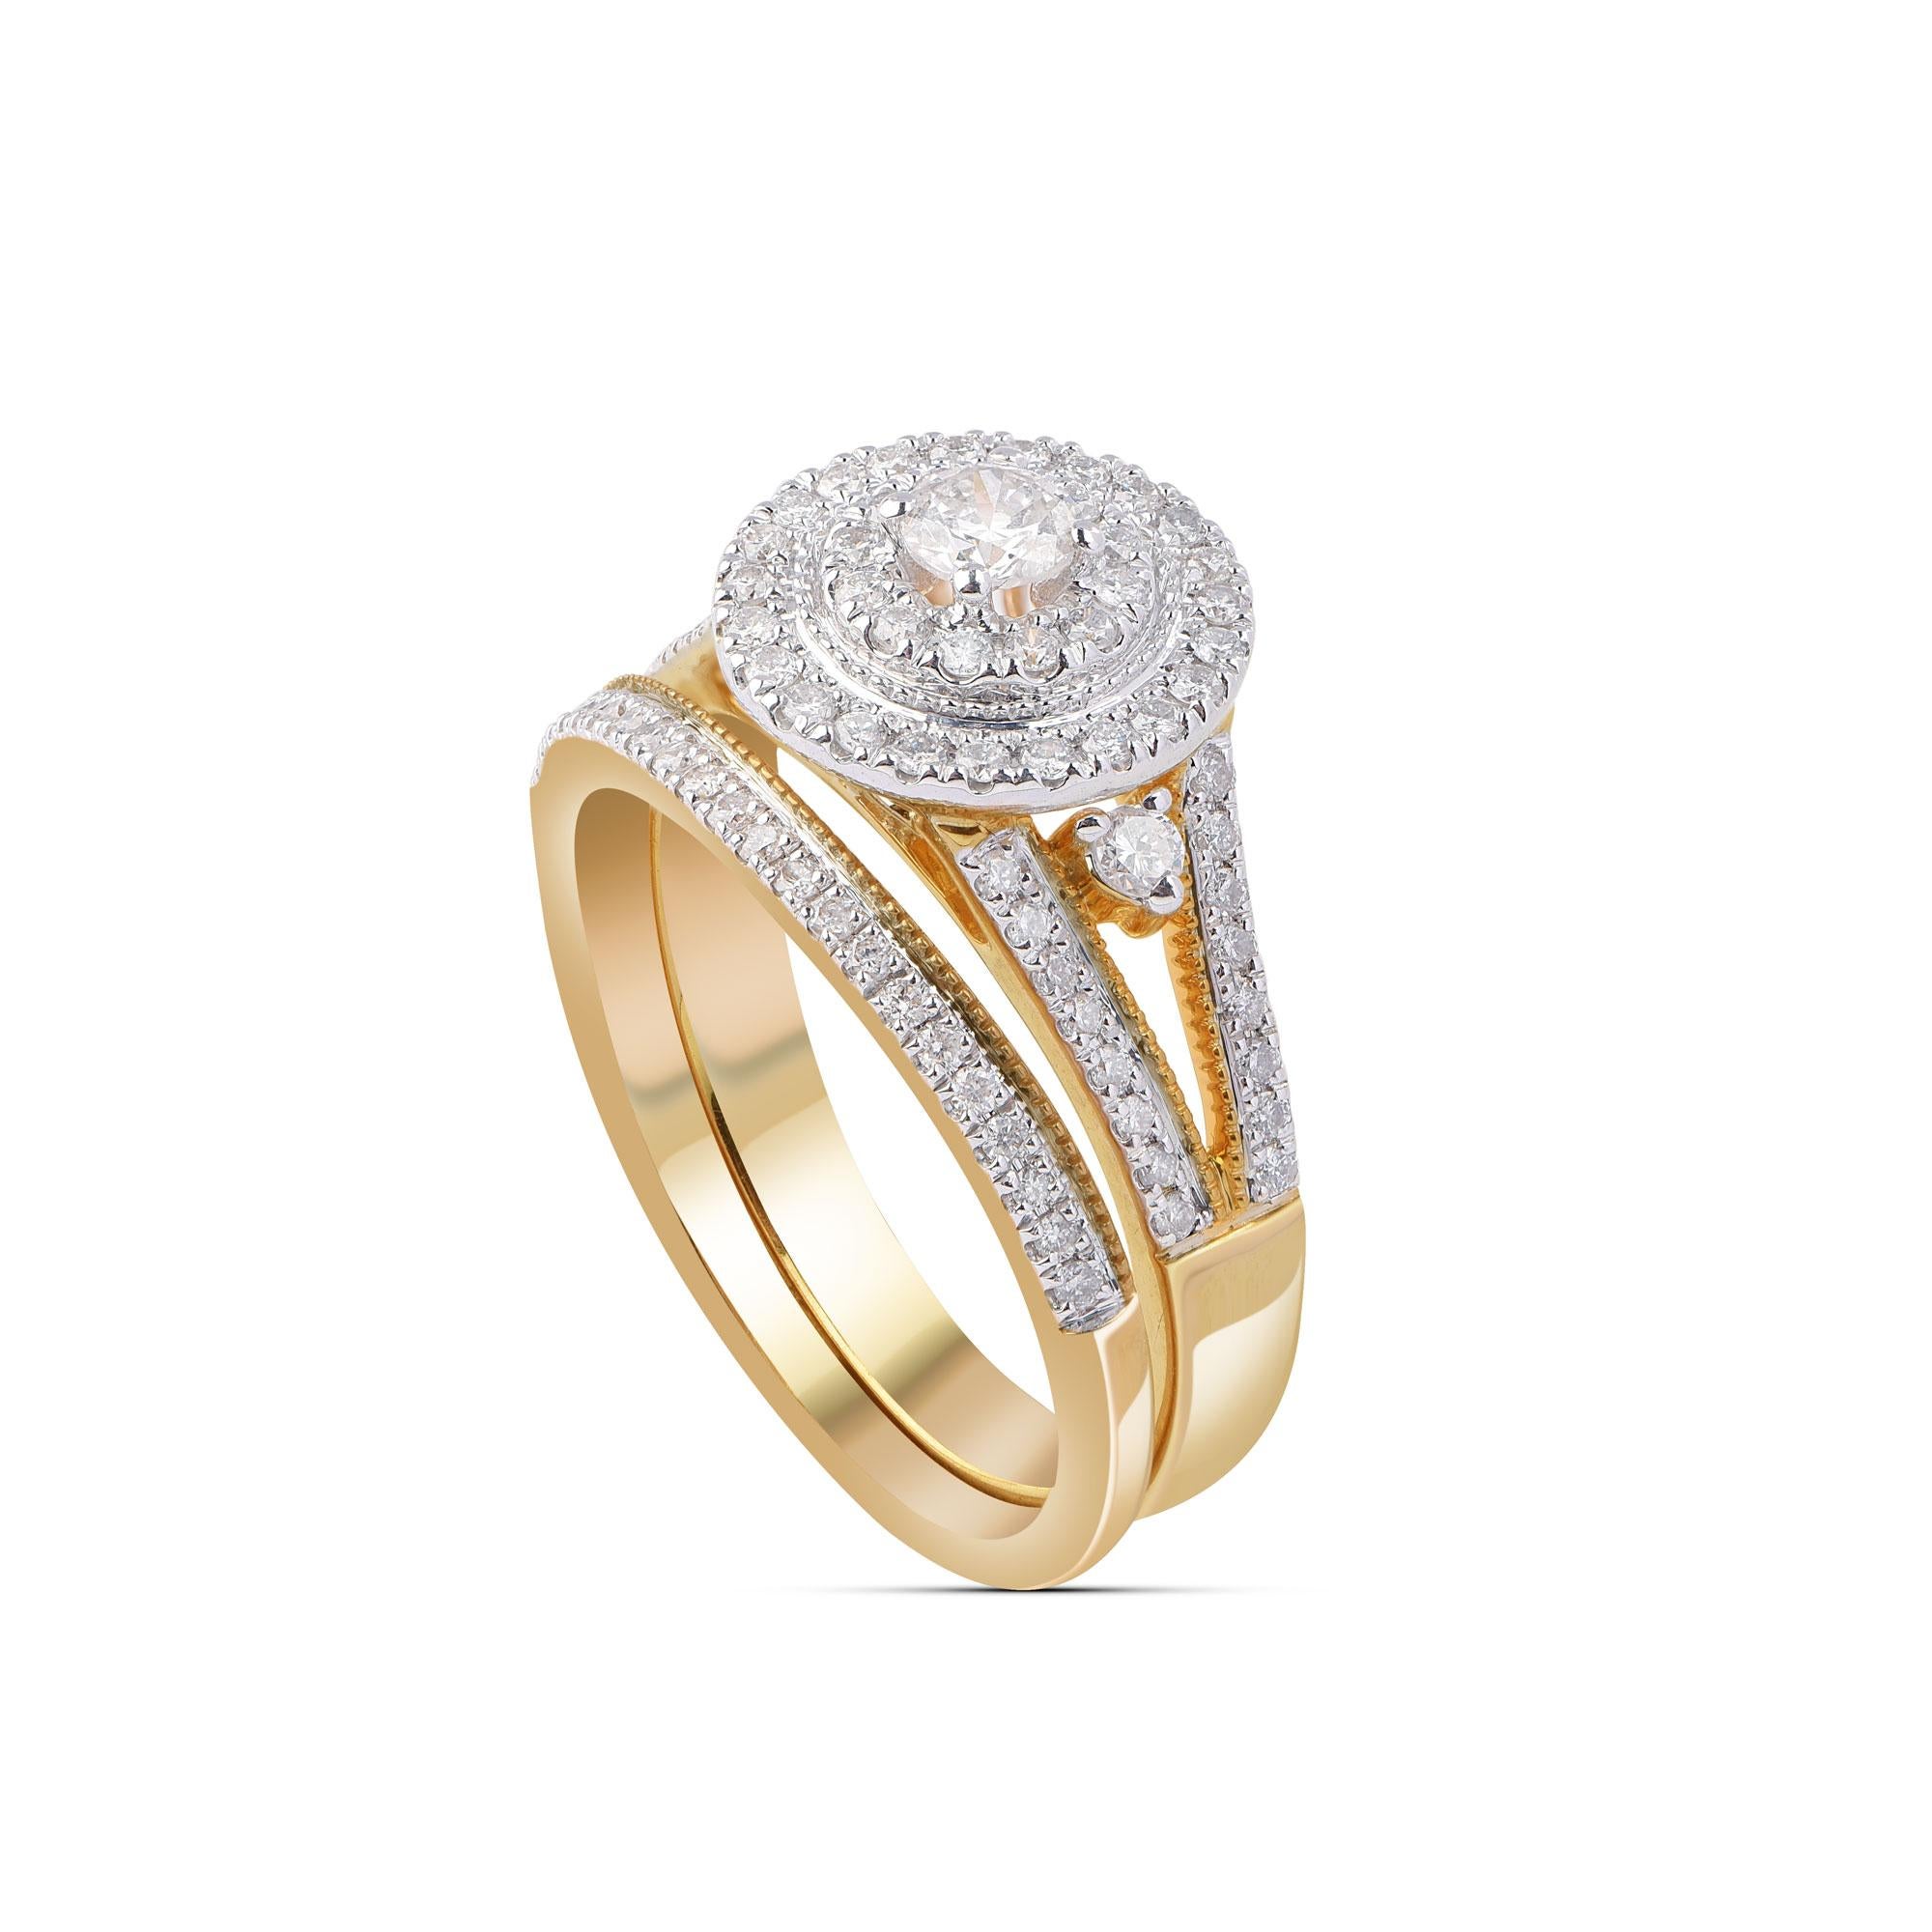 This ring is studded with 92 round diamonds elegantly in micro-prong, prong and pave setting and made by our experts in 14-karat yellow gold, diamonds are graded H-I Color, I1 Clarity. Ring size is US size 7 and can be resized on request.